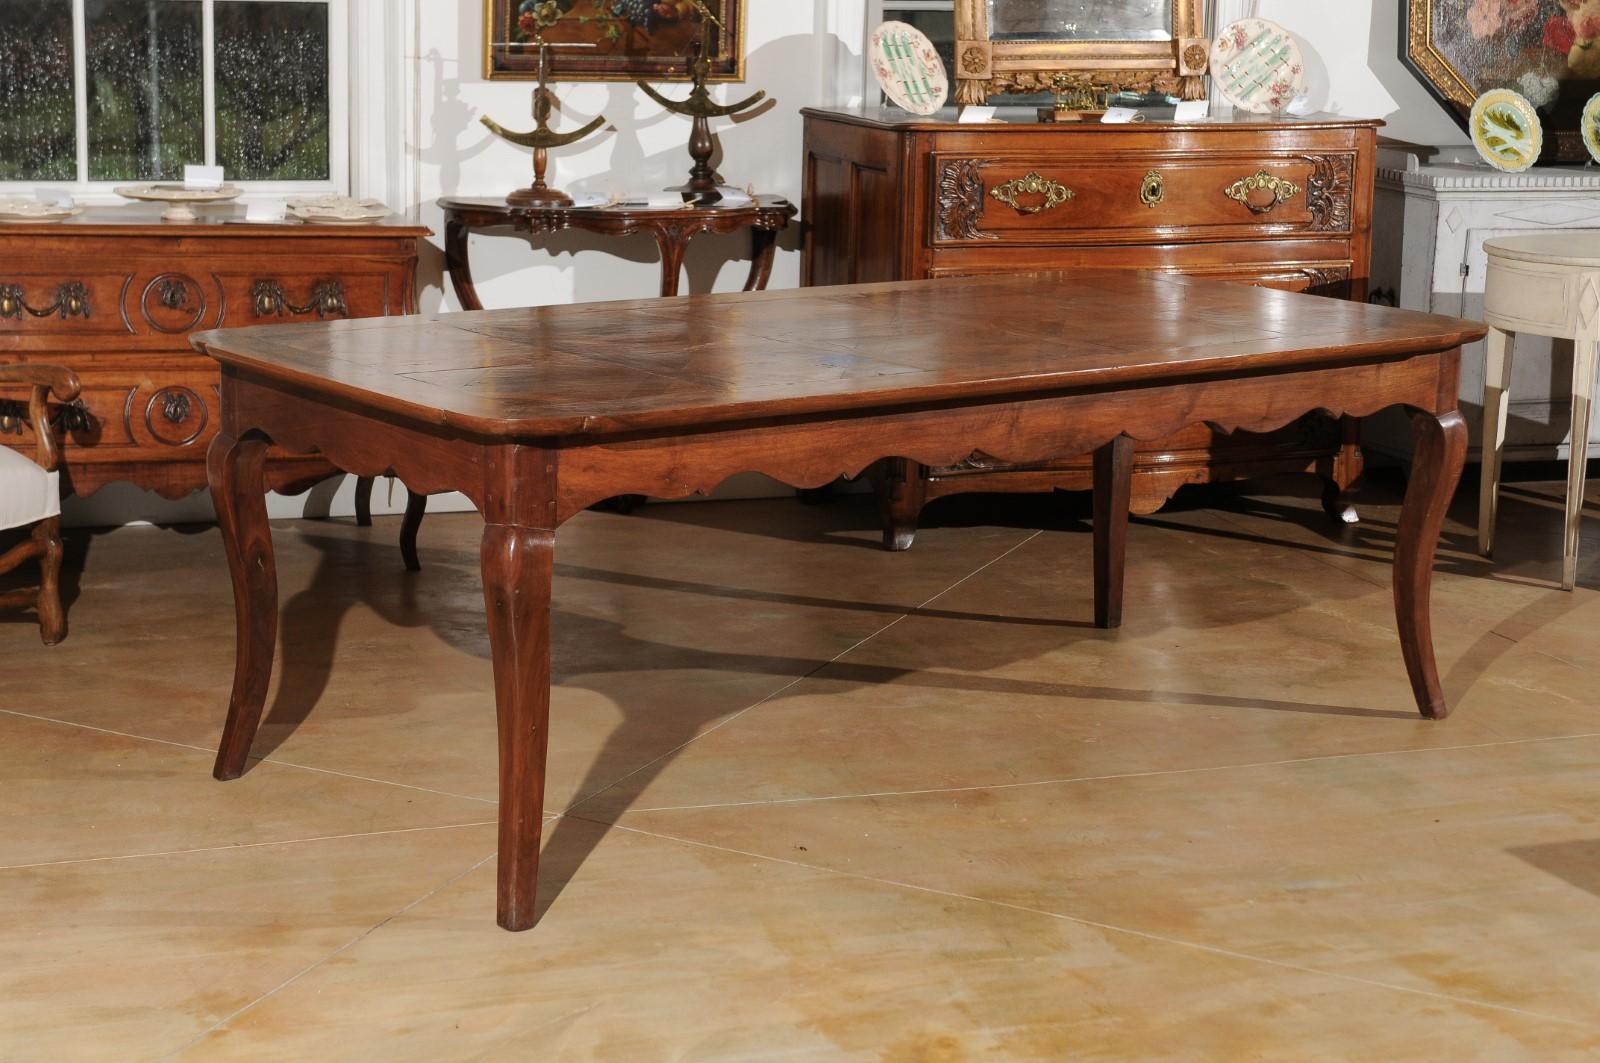 A custom made French Louis XV style dining table from Lyon made from 19th century parts, with parquetry top, carved apron and cabriole legs. Crafted in the Rhône Valley from 19th century wood, this Louis XV style dining table will comfortably seat 8